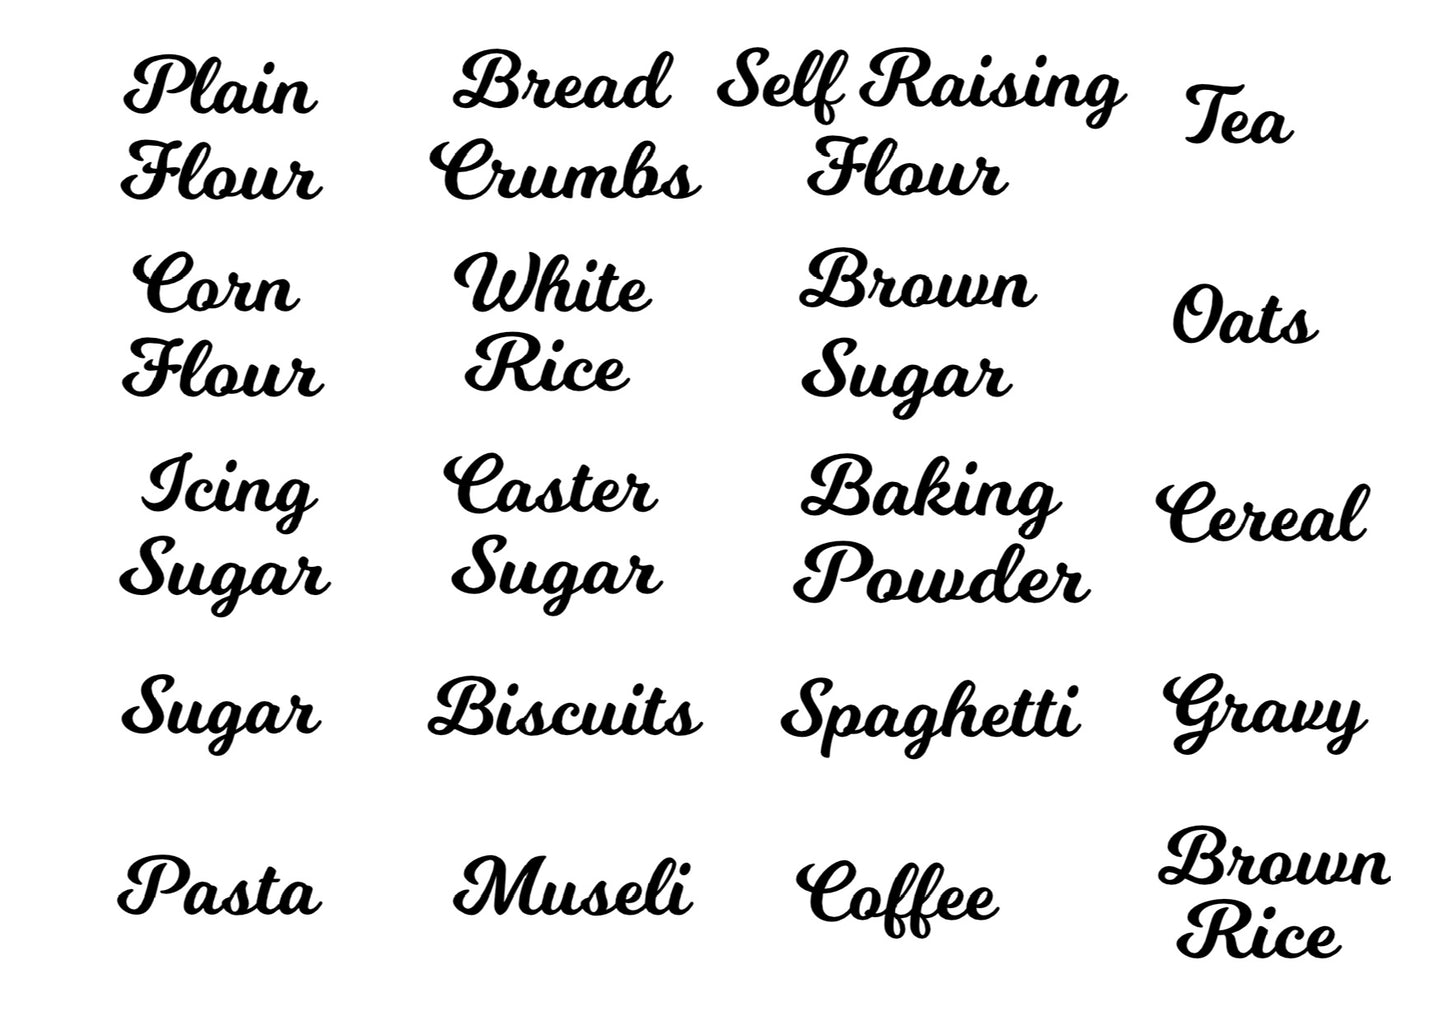 Small Plain Pantry Labels - 20 Pack